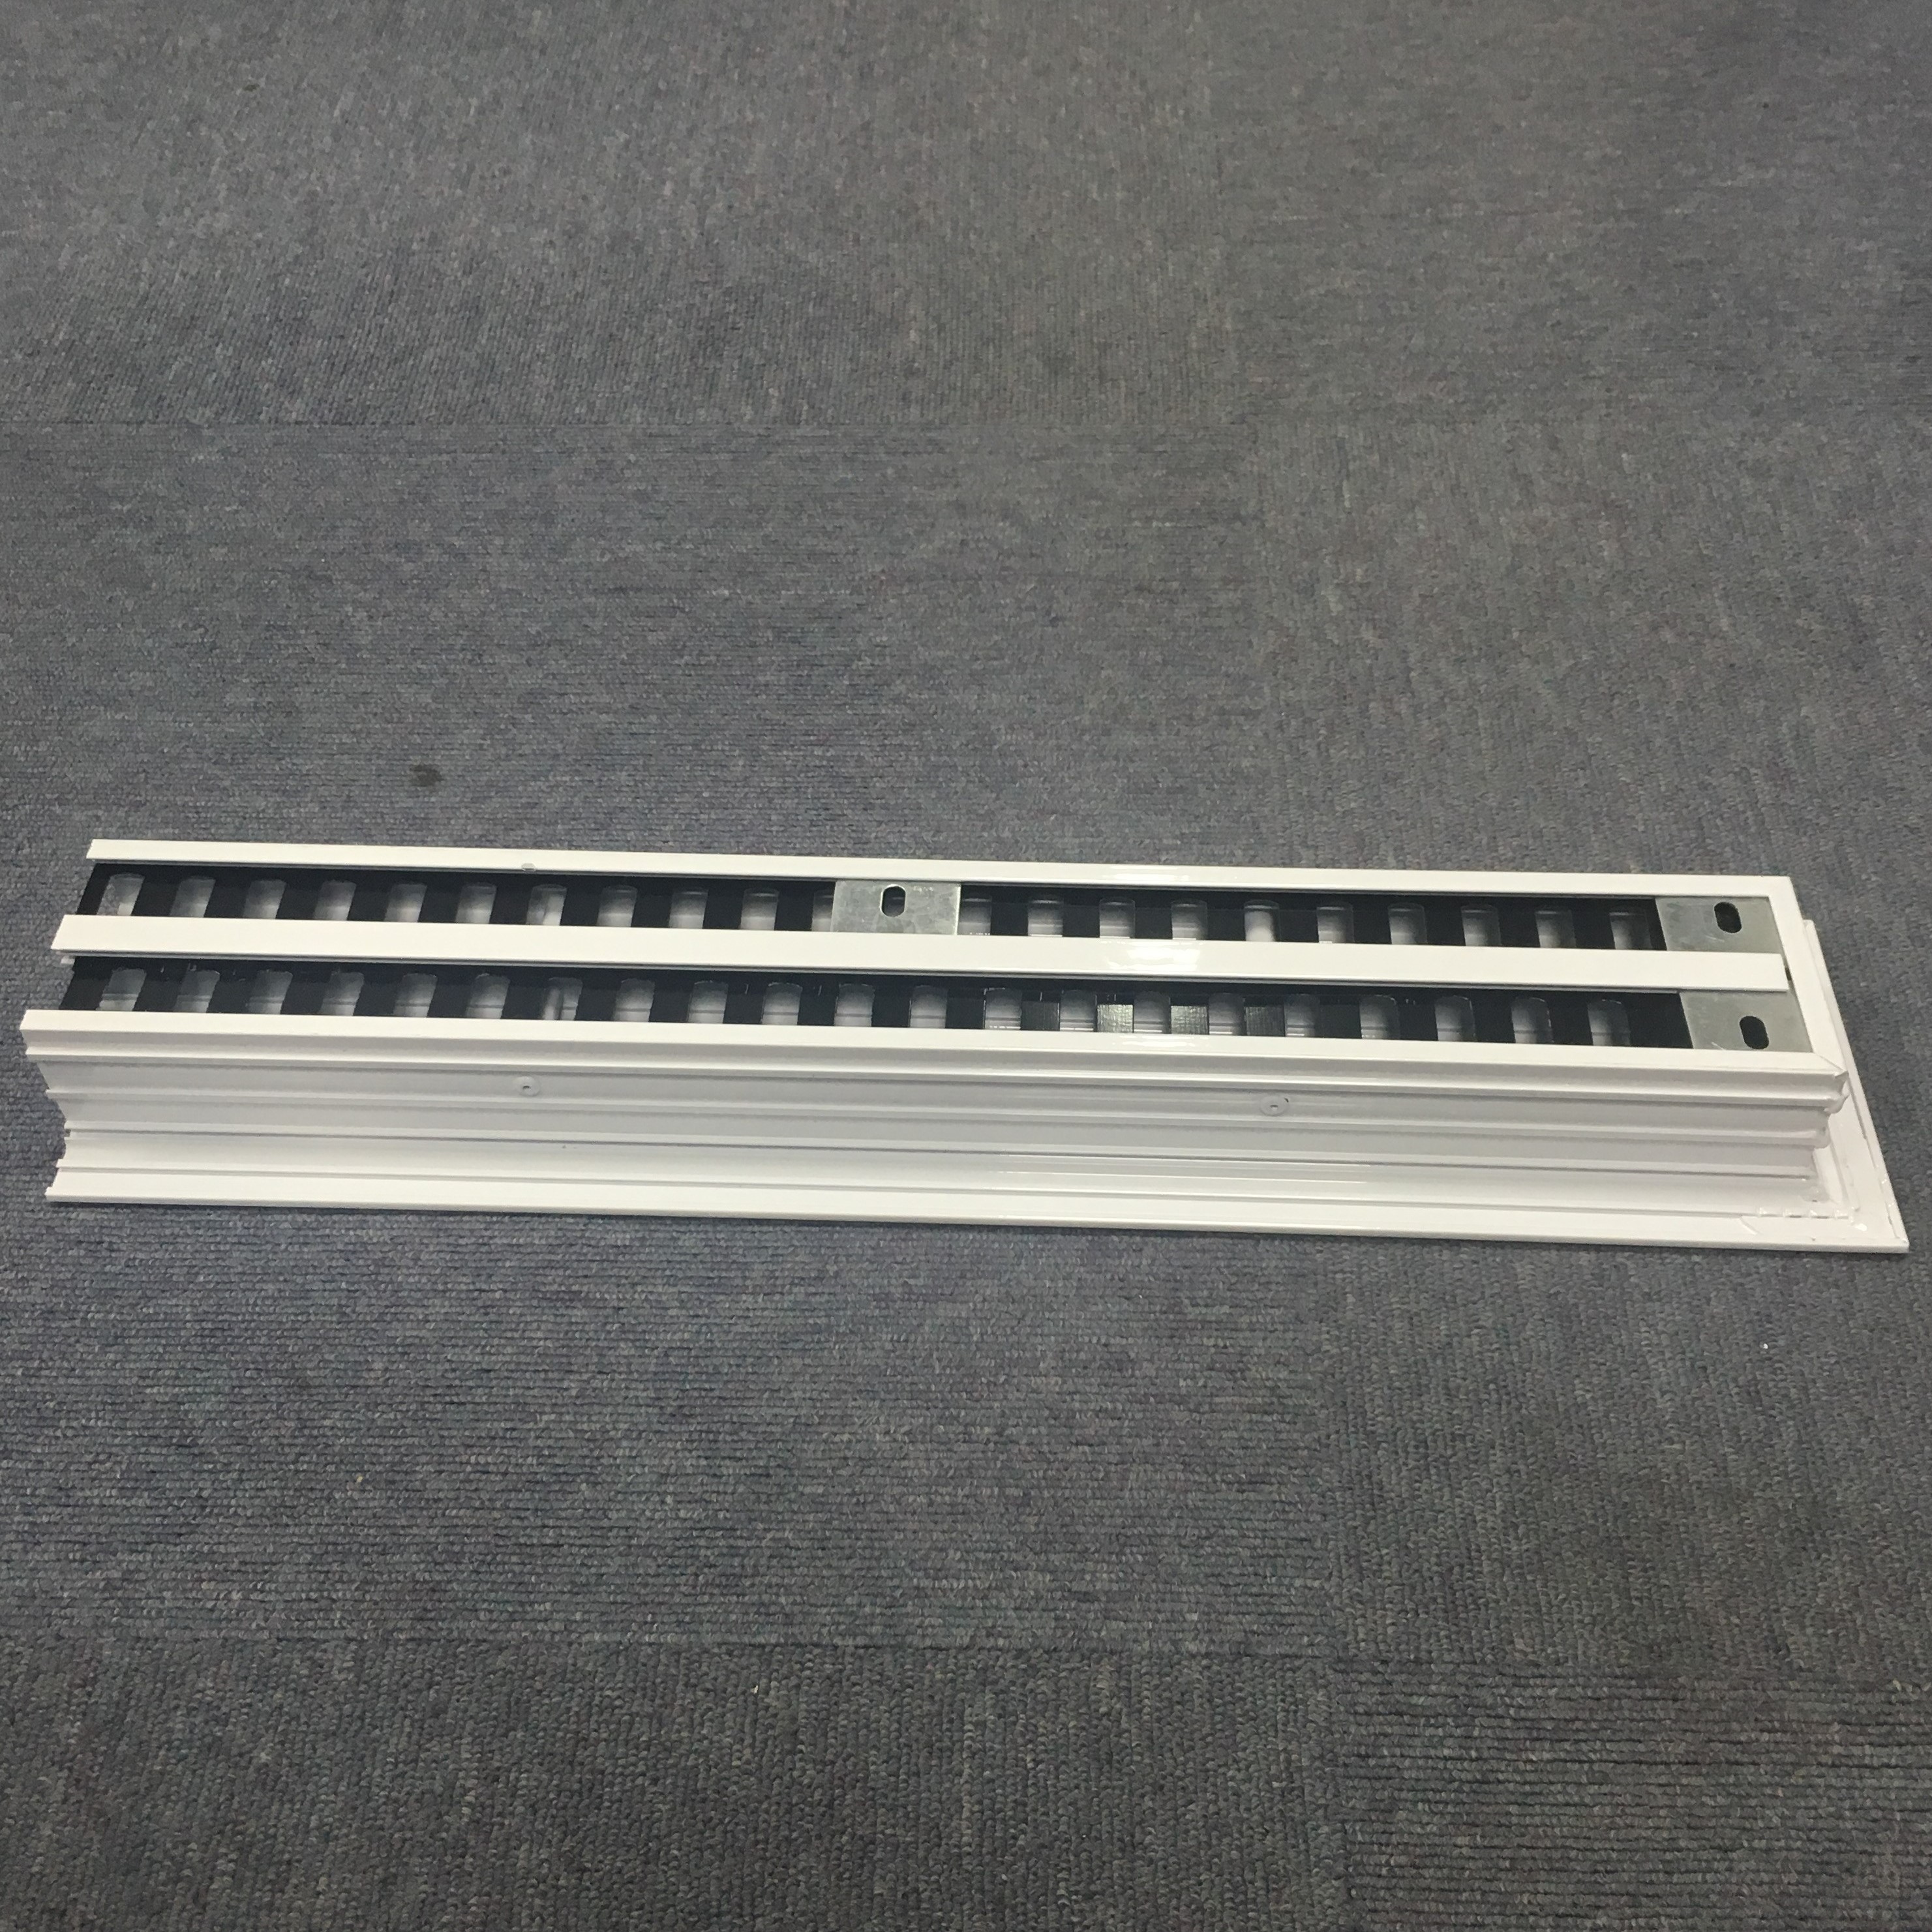 Airmaster  Linear slot diffuser- with removable pattern control device